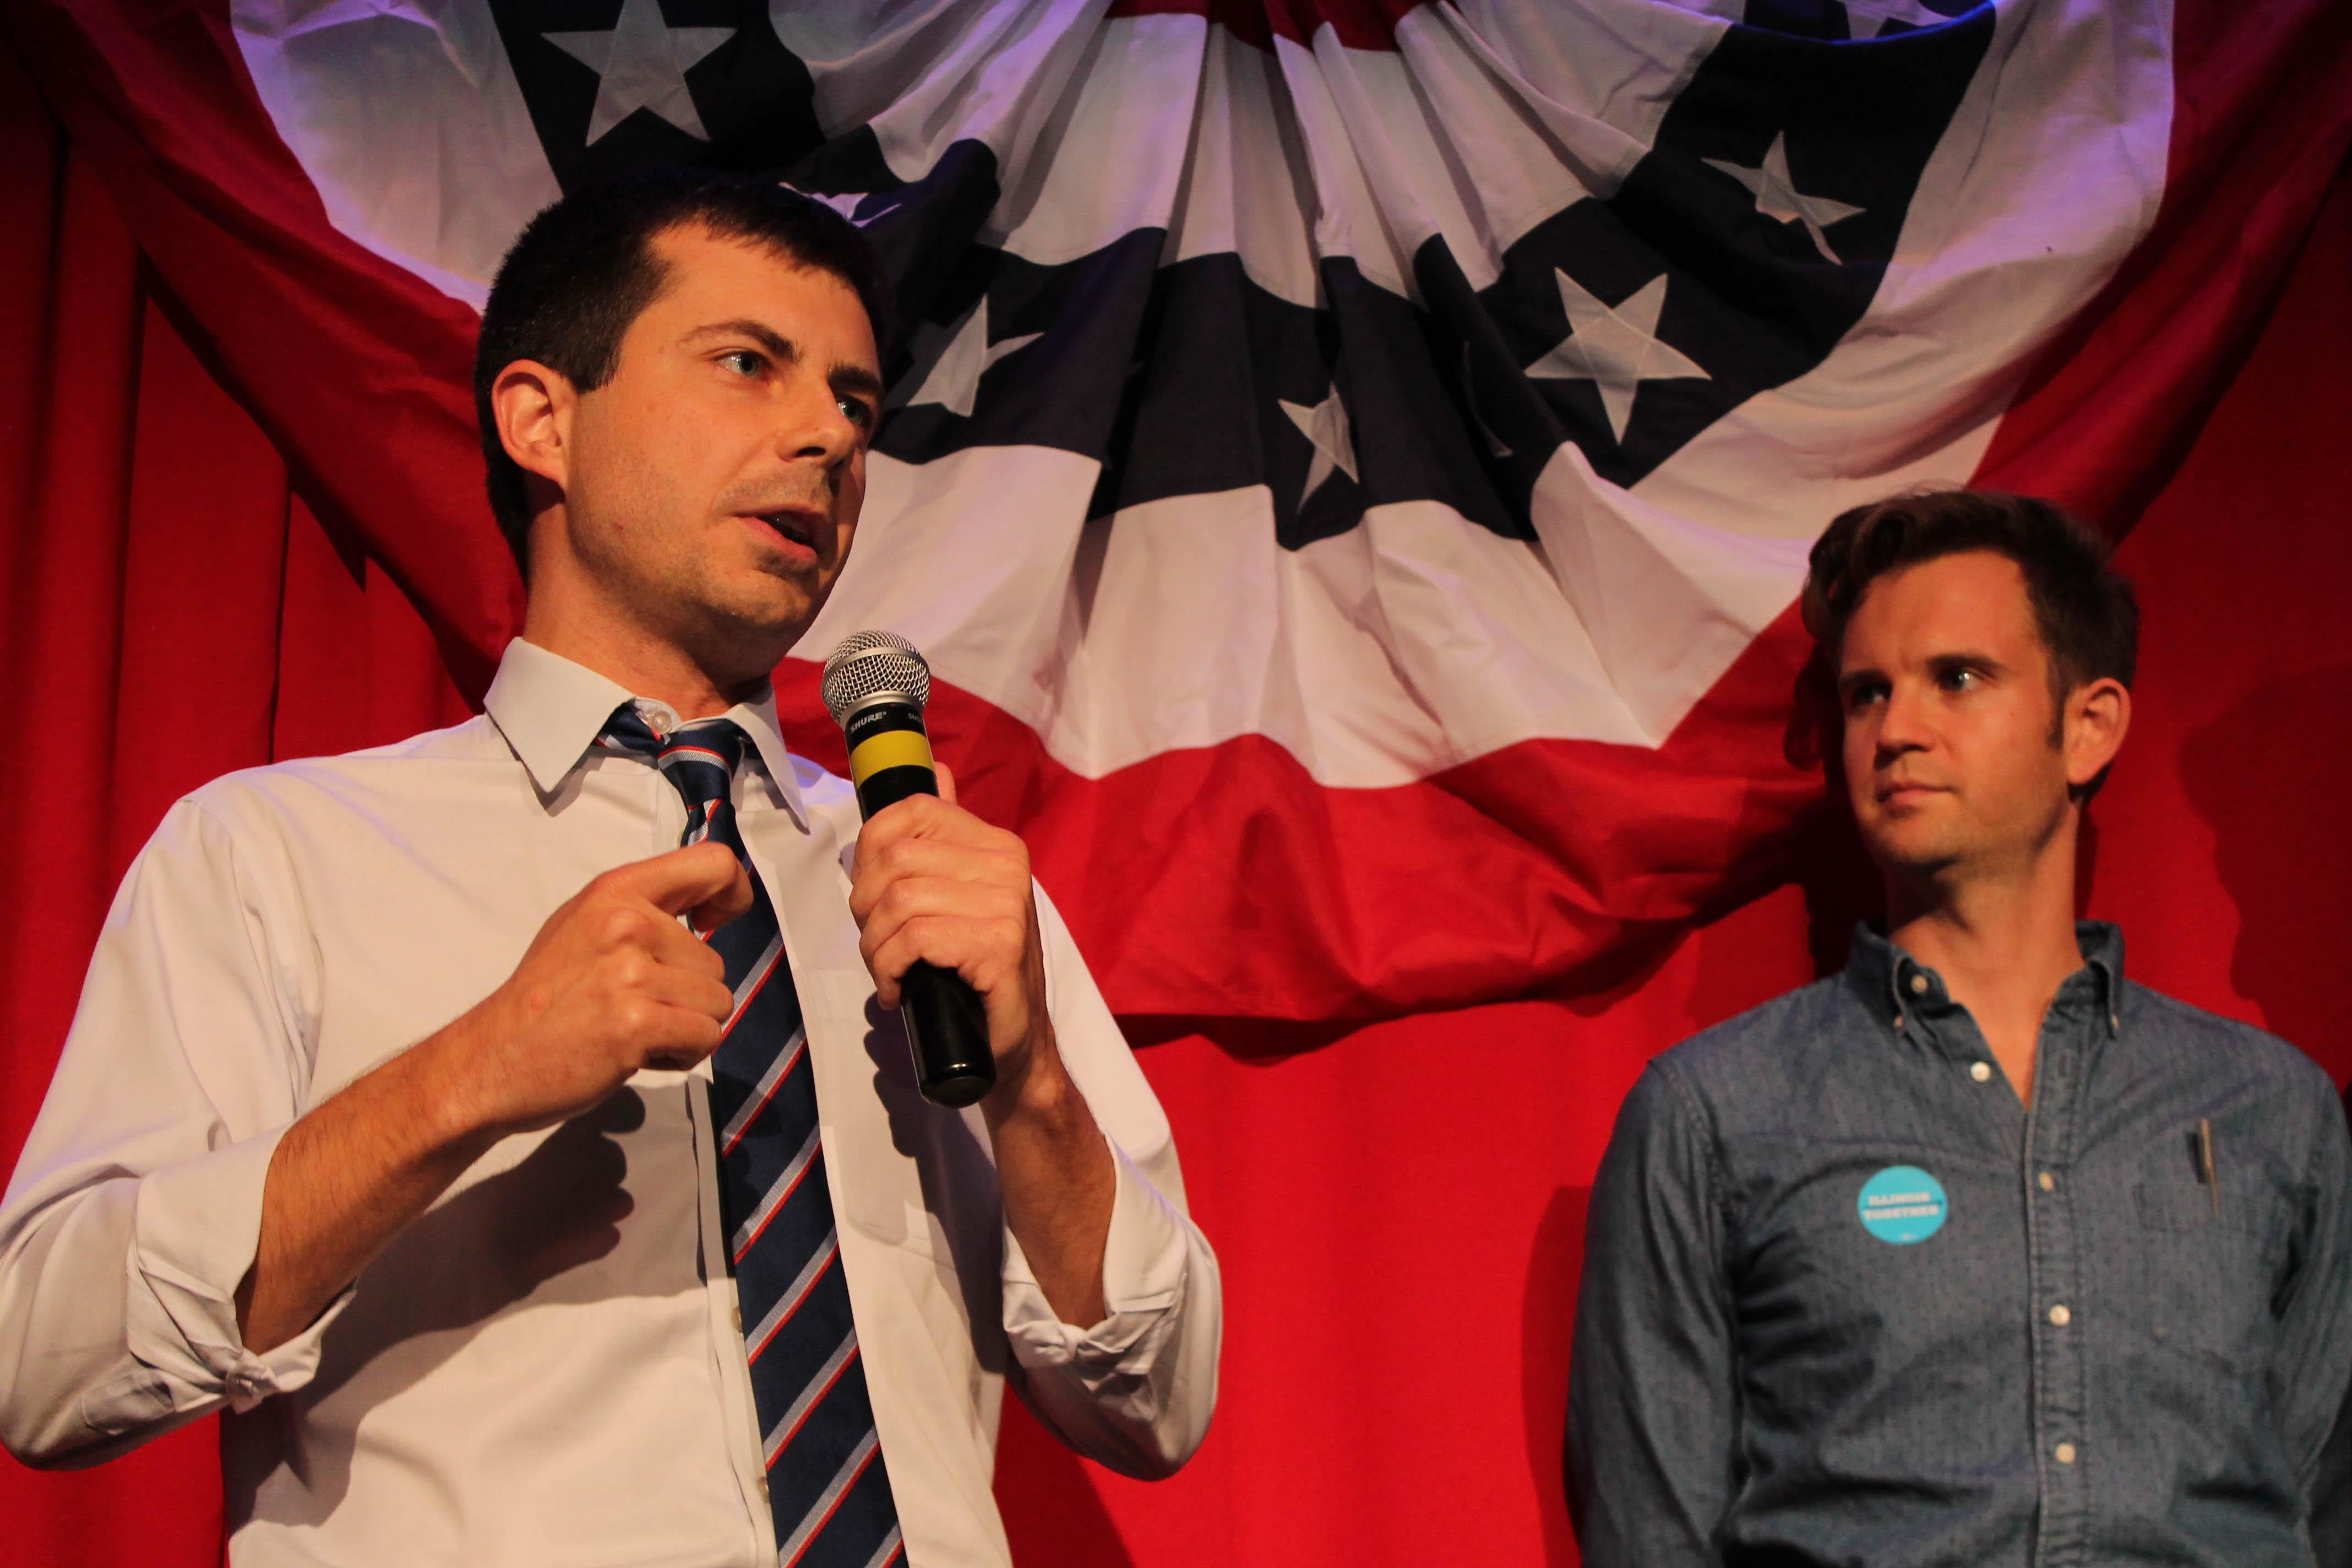 Standing in front of a patriotic-looking background, Buttigieg speaks into a microphone.